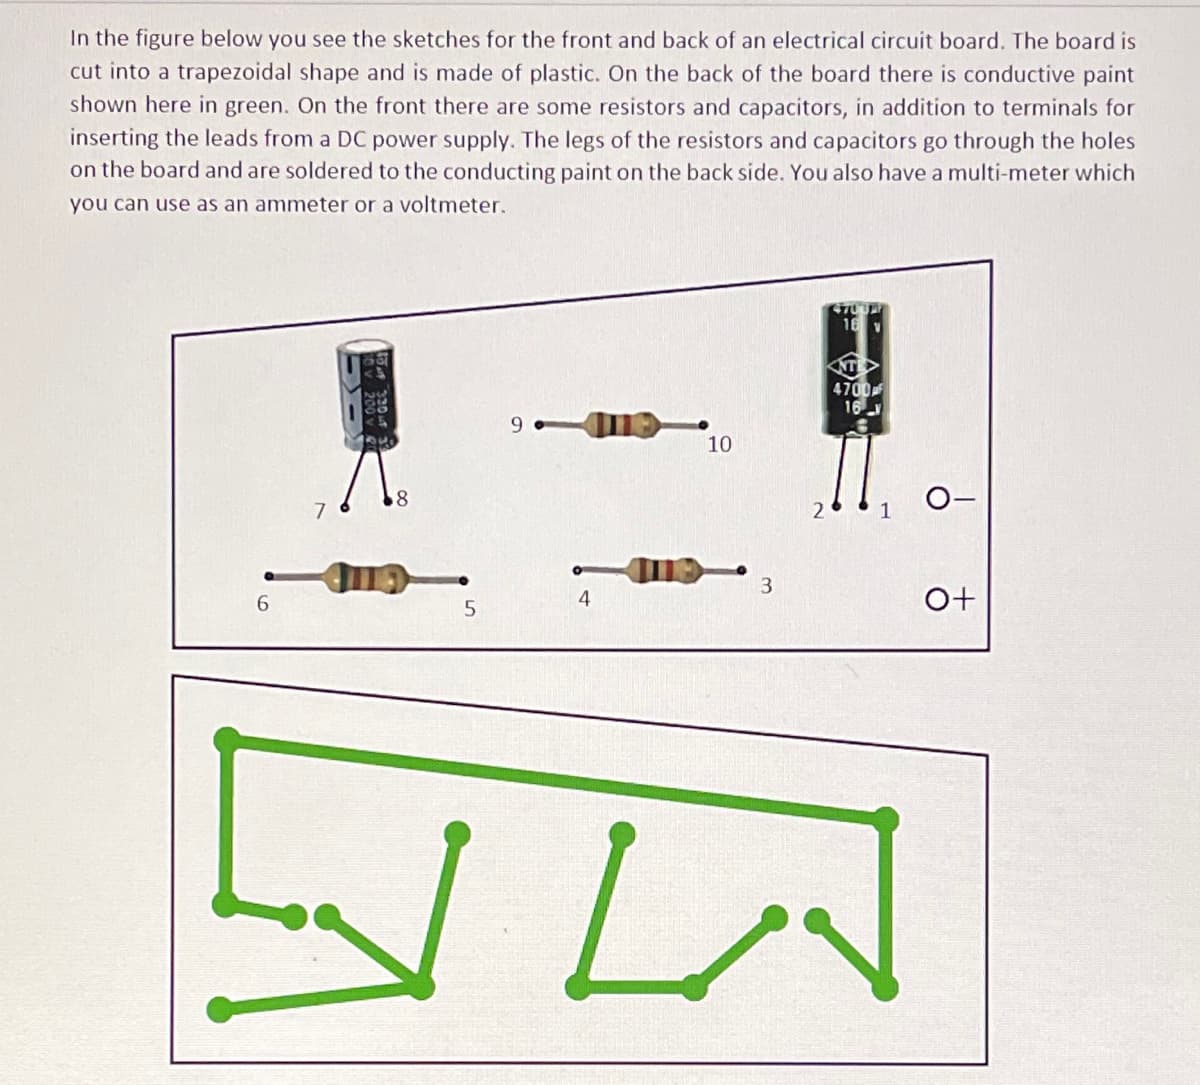 In the figure below you see the sketches for the front and back of an electrical circuit board. The board is
cut into a trapezoidal shape and is made of plastic. On the back of the board there is conductive paint
shown here in green. On the front there are some resistors and capacitors, in addition to terminals for
inserting the leads from a DC power supply. The legs of the resistors and capacitors go through the holes
on the board and are soldered to the conducting paint on the back side. You also have a multi-meter which
you can use as an ammeter or a voltmeter.
16 v
4700
16
10
8
O-
7
3.
6.
4
O+
